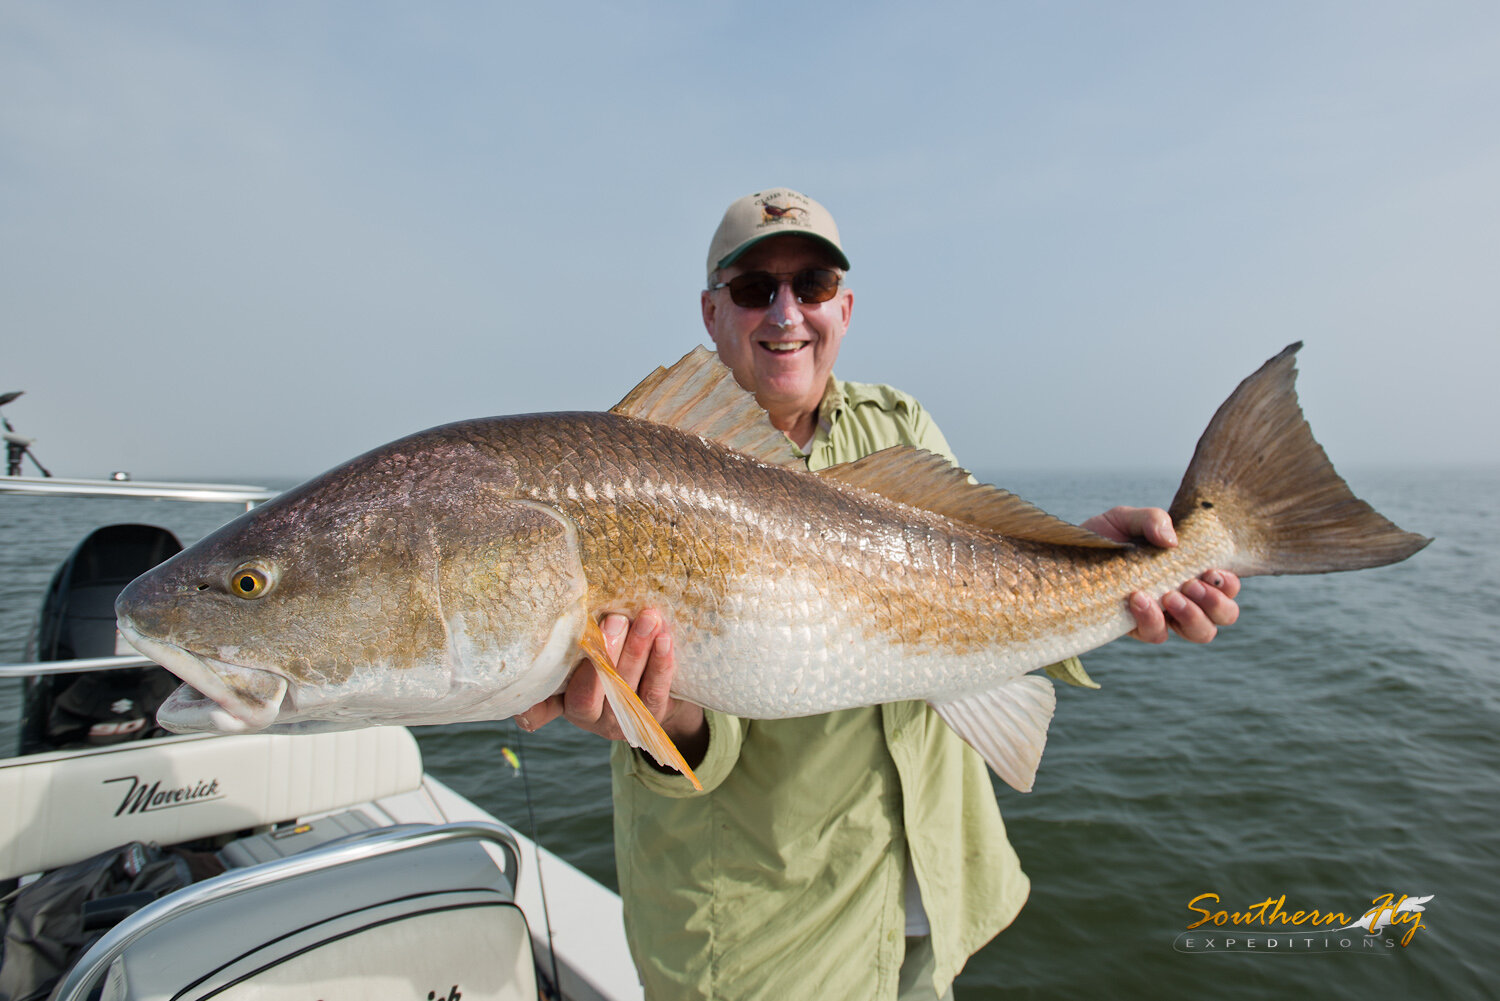 2020-01-16_SouthernFlyExpeditions_NewOrleans_RickCrivelloneAndMikePurcell-5.jpg